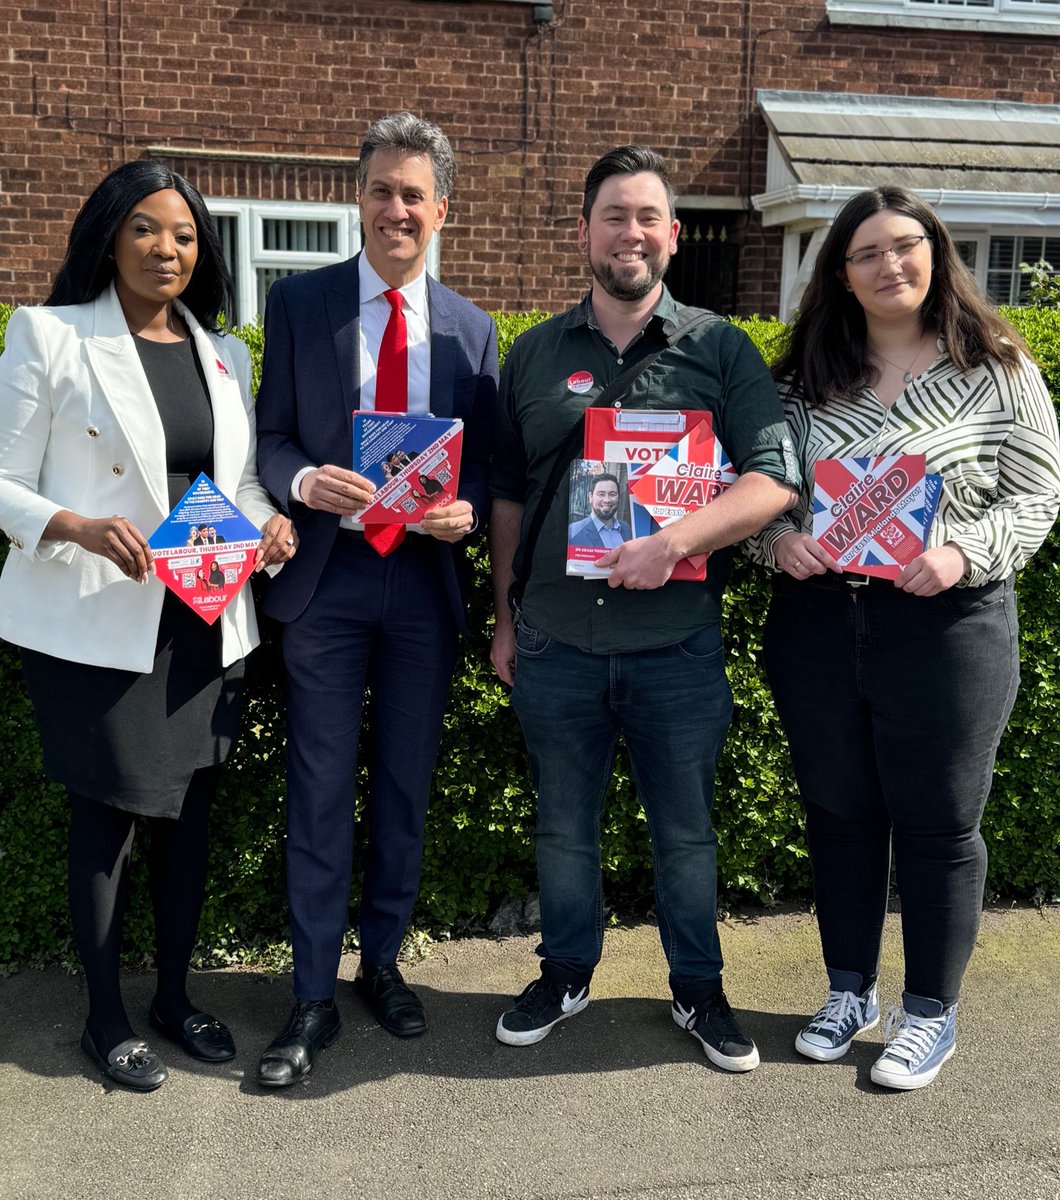 It's the 2nd April & the PCC & #EastMidlands Mayoral election is on the 2nd May...Where has the time gone? Great to be out doorknocking in #Erewash with Shadow Secretary of State for Climate Change & Net Zero @Ed_Miliband MP & our awesome PPC @adamthompson111 #VoteLabour🌹